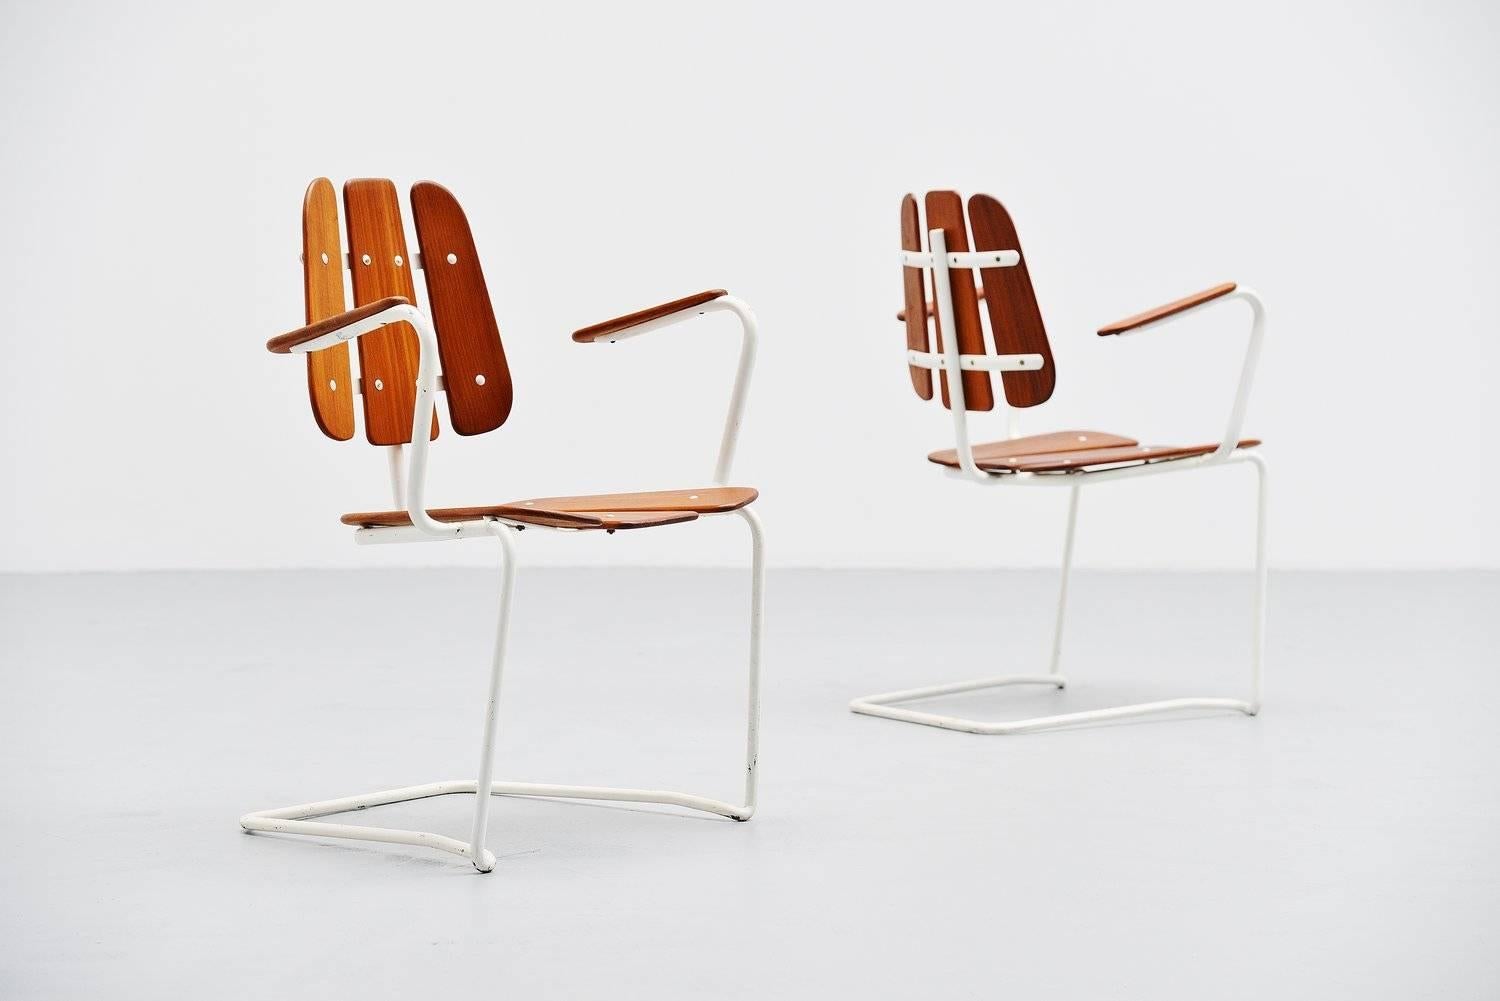 Mid-20th Century Swedish Cantilevered Garden Chairs in Teak, 1960